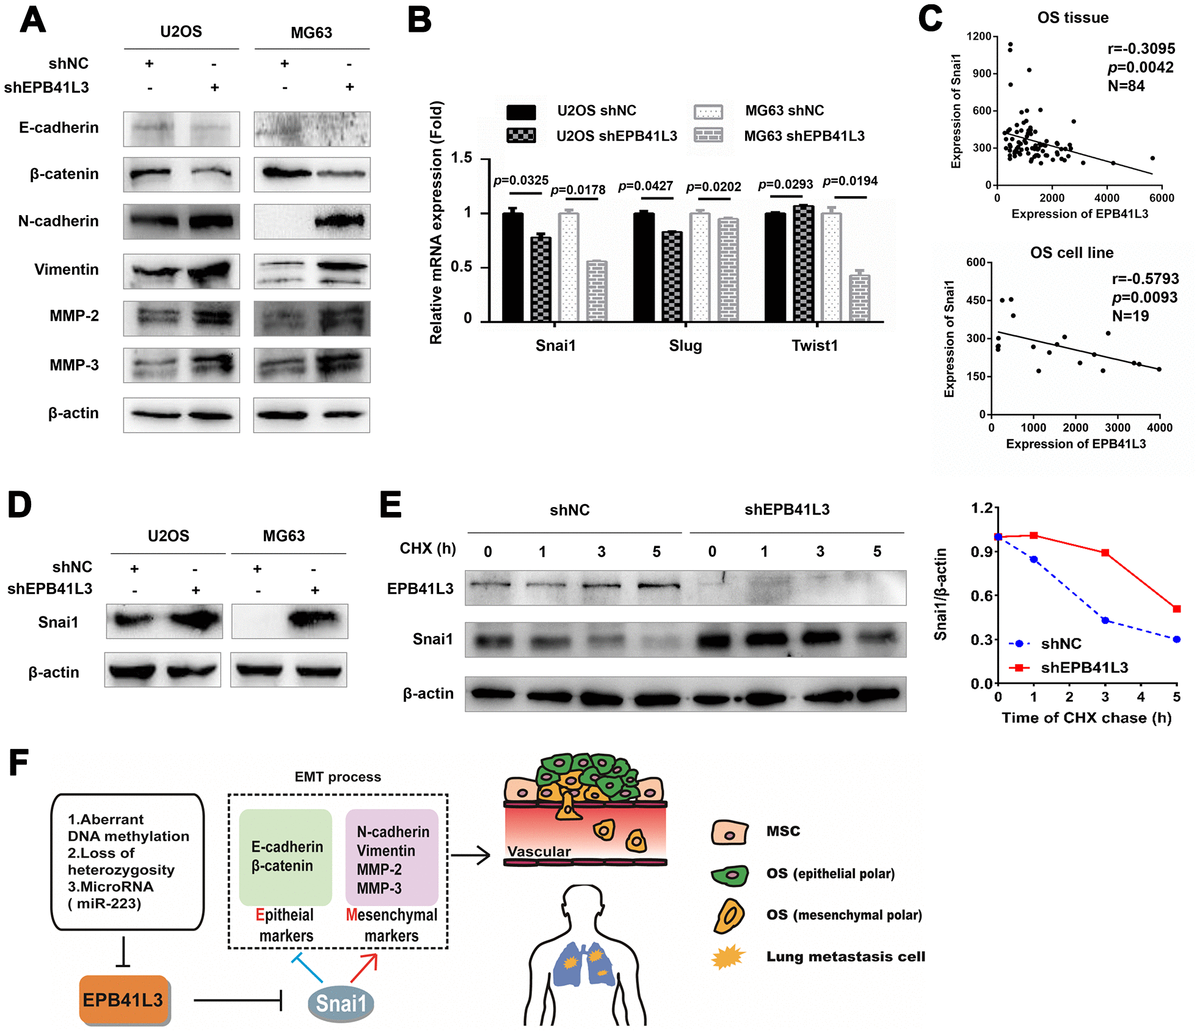 EPB41L3 suppresses EMT and decreases the protein expression of Snai1. (A) Western blot results of EMT markers in U2OS and MG63 cells stably expressing shNC or shEPB41L3. (B) Quantitative RT-PCR analysis suggested that EPB41L3 knockdown did not increase EMT-TFs mRNA expression including Snai1, Slug, and Twist1. (C) Spearman’s correlation analysis showed an inverse correlation between Snai1 and EPB41L3. (D) Western blot results showed that EPB41L3 knockdown increased Snai1 protein expression. (E) EPB41L3 knockdown enhanced Snai1 protein stability. U2OS shNC and shEPB41L3 cells were treated with 20 μM of CHX and harvested at indicated time points for immunoblotting analysis. The graph showed the relative Snai1 protein expression level (Snai1/β-actin) based on the band intensity from the gels. Snai1 protein level at 0 hour time point of CHX treatment was set as 1. (F) Schematic diagram of the proposed mechanism for regulatory roles of EPB41L3 on metastasis in osteosarcoma. CHX, cycloheximide.